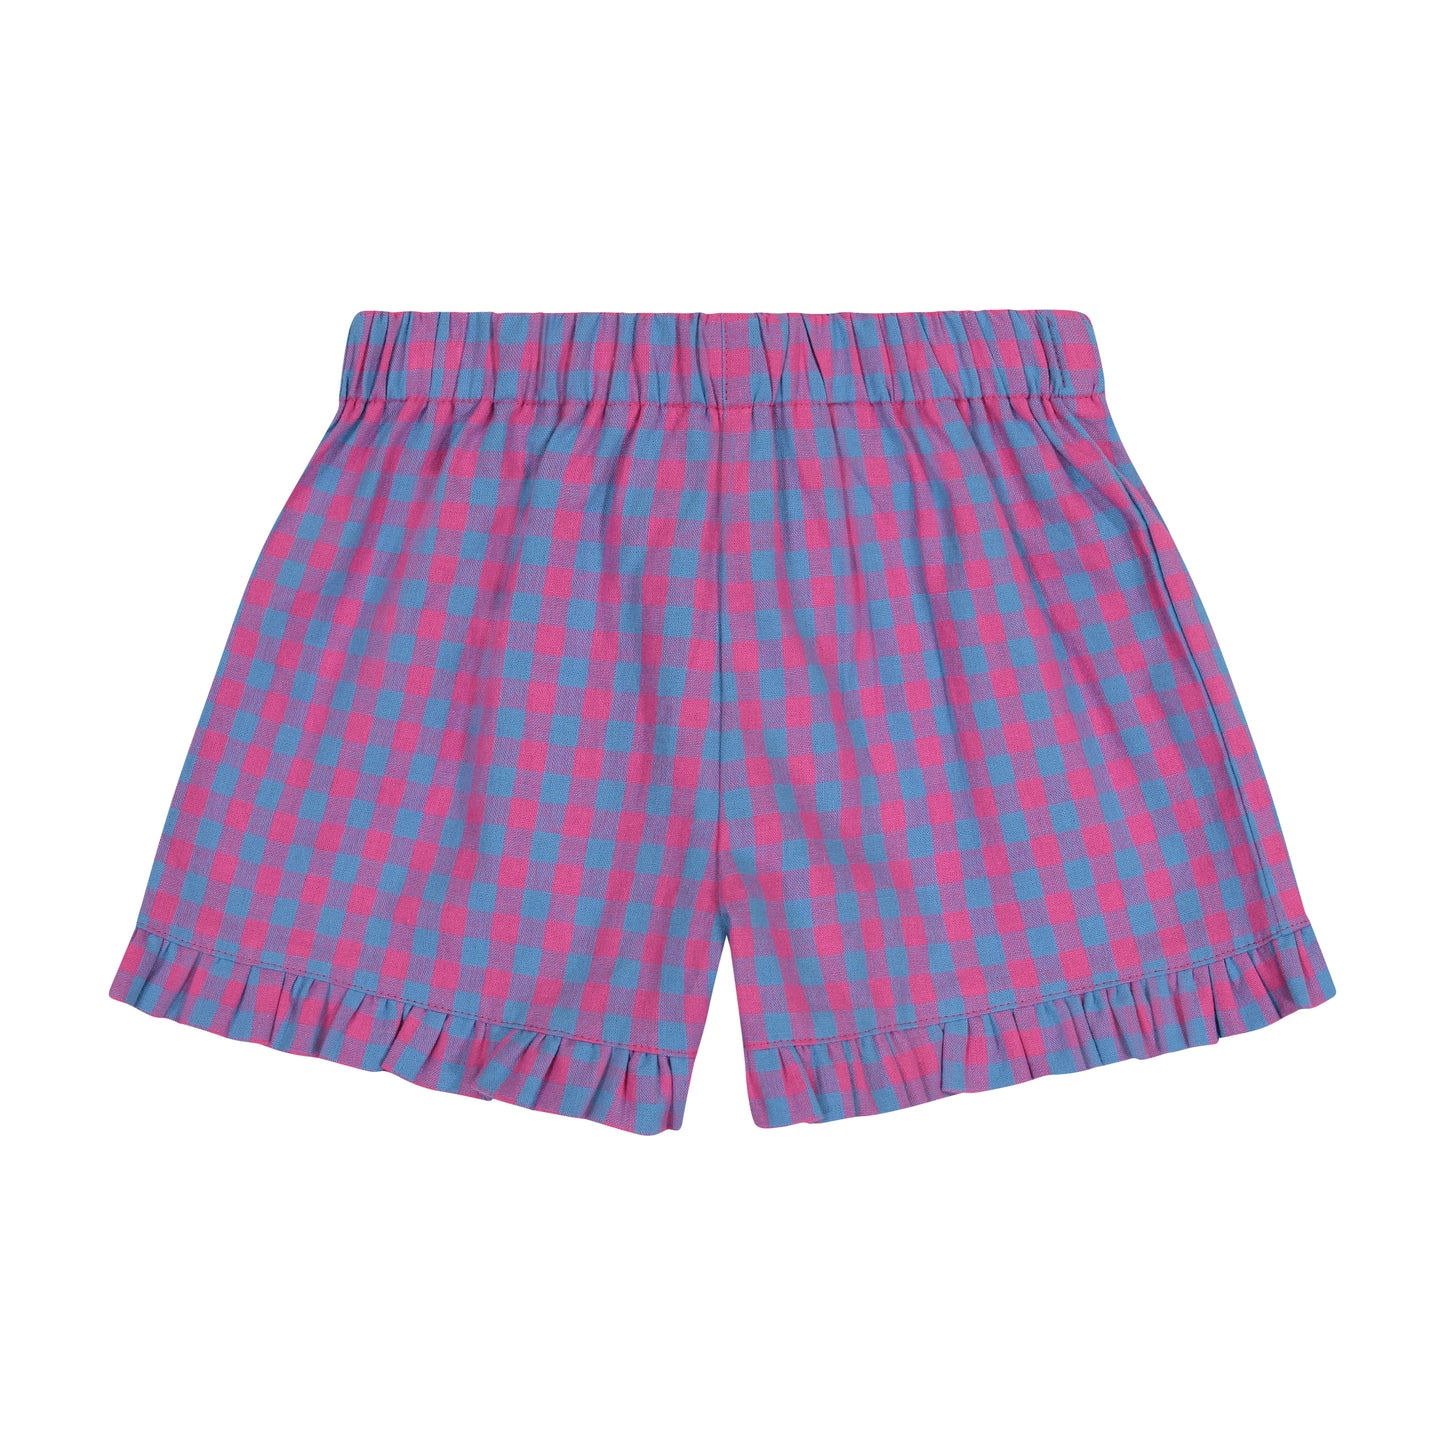 Lee Lee Ruffle Shorts Pink Blue Gingham Check